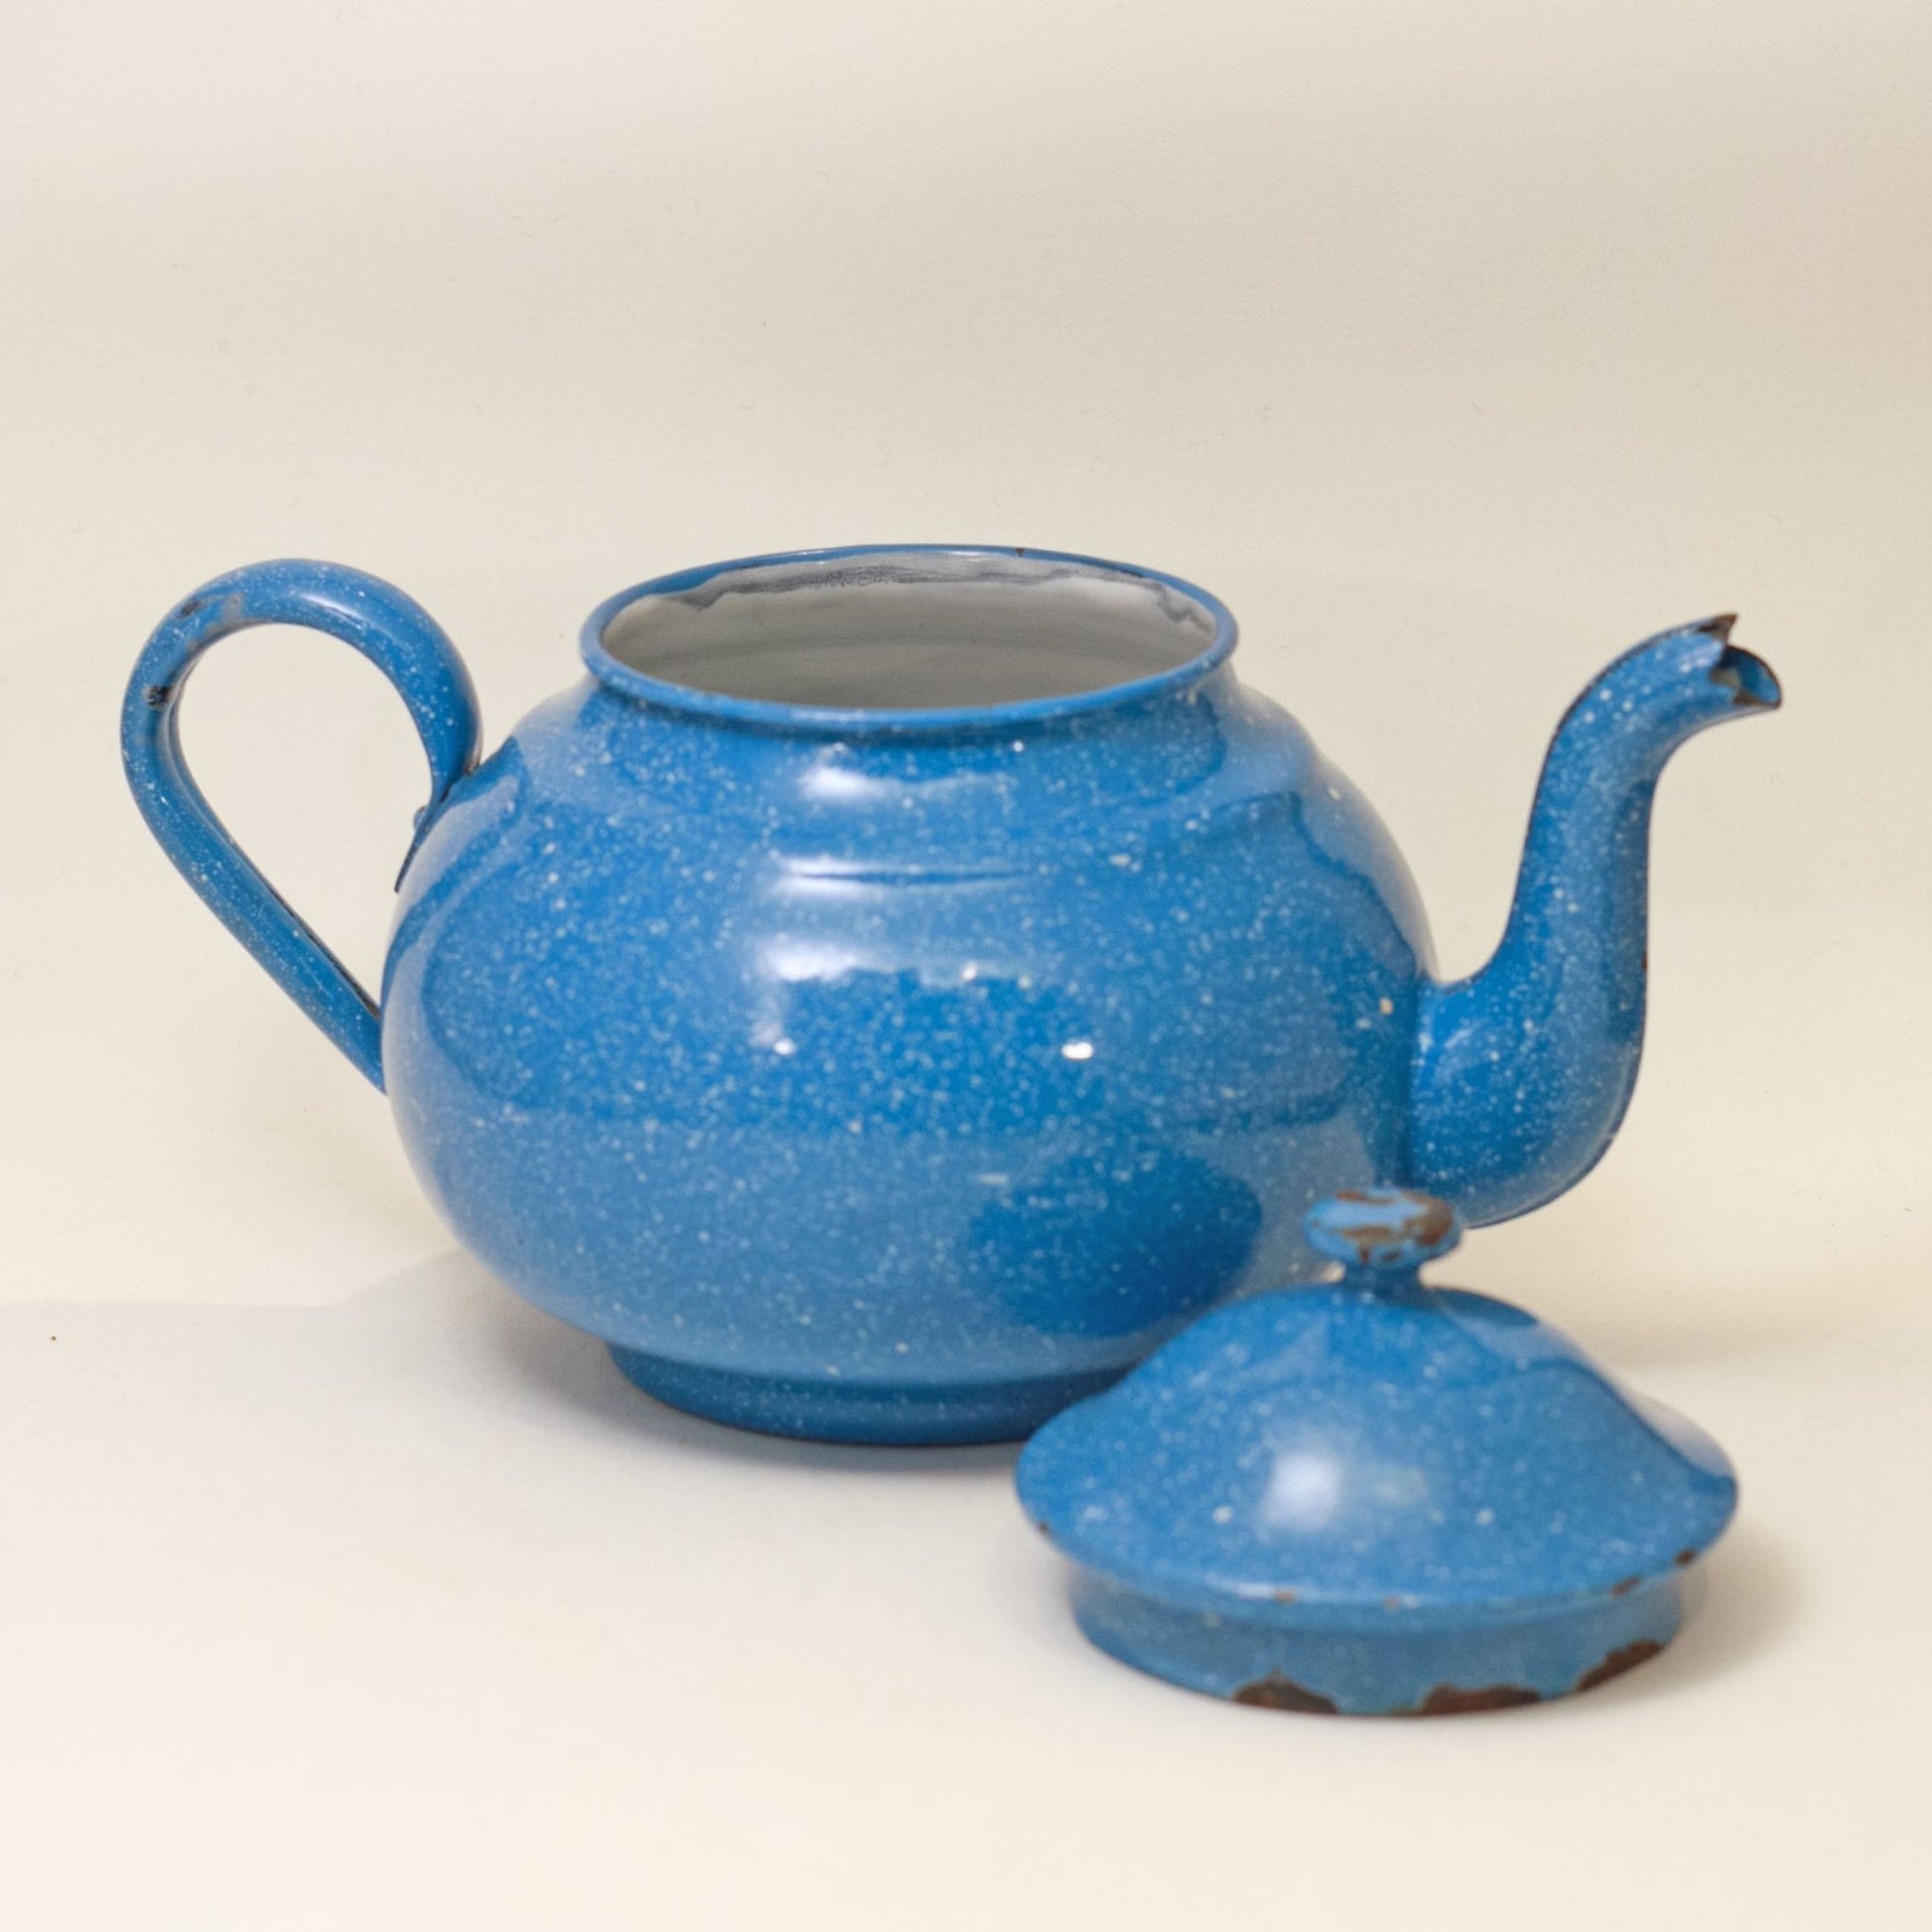 GRANITEWARE TEA KETTLE Blue and White Speckled Early 20th Century